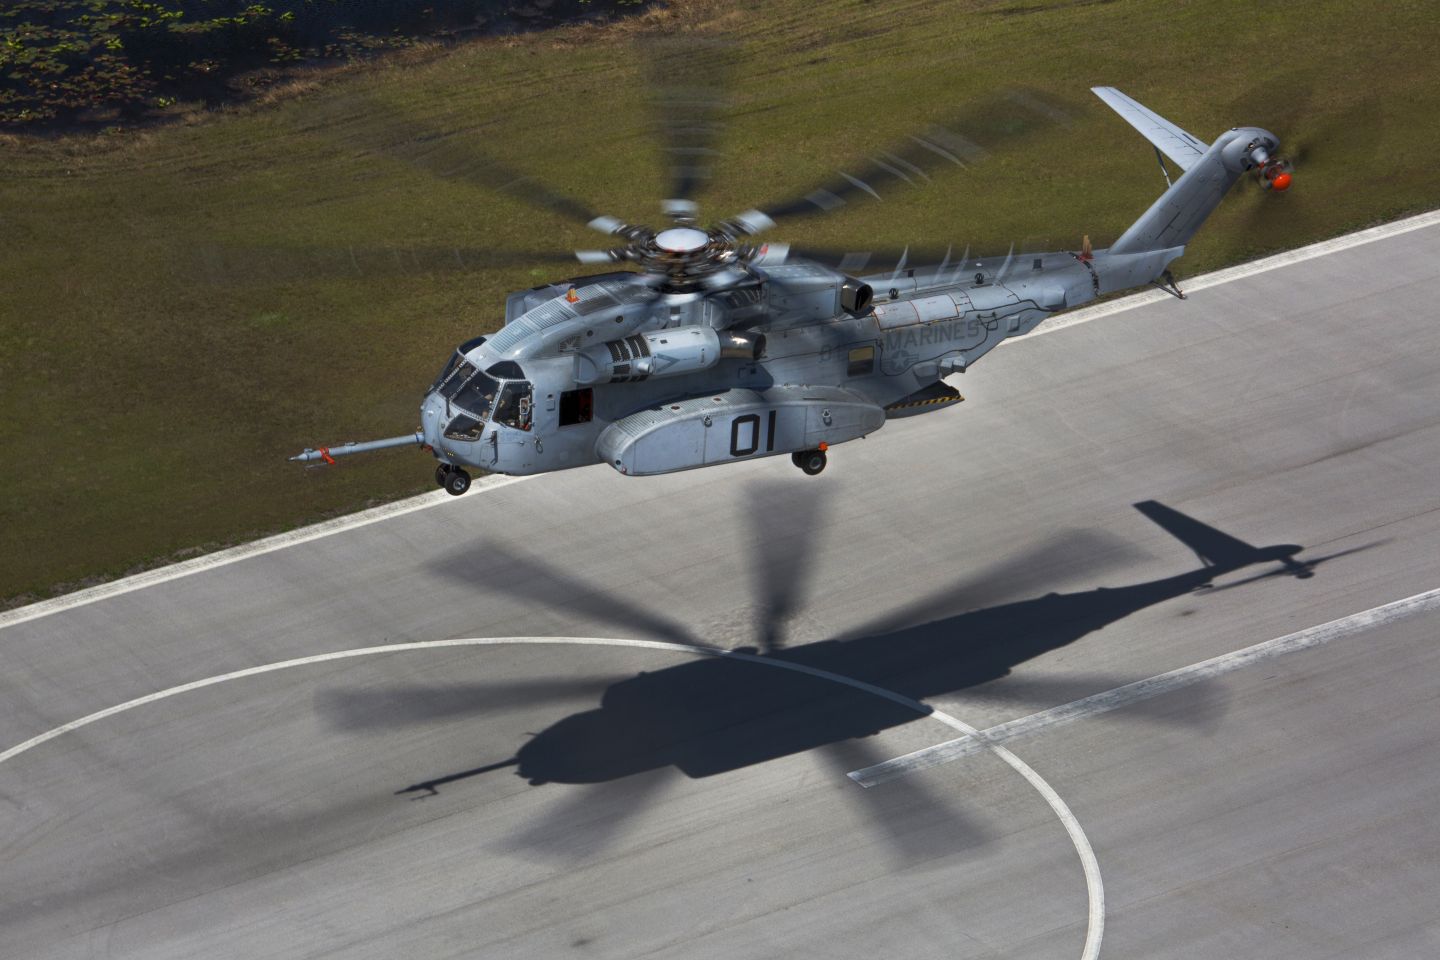 The CH-53K flies a test flight on 22 March 2017 in West Palm Beach, Florida. The GAO, in a report, recommended the US Navy cap CH-53K production at six per year until the end of IOT&E because increasing production, in the face of unresolved technical challenges and still-to-be completed testing, could prove costly and delay delivery of suitable aircraft. The Pentagon and experts disagree. (US Marine Corps)